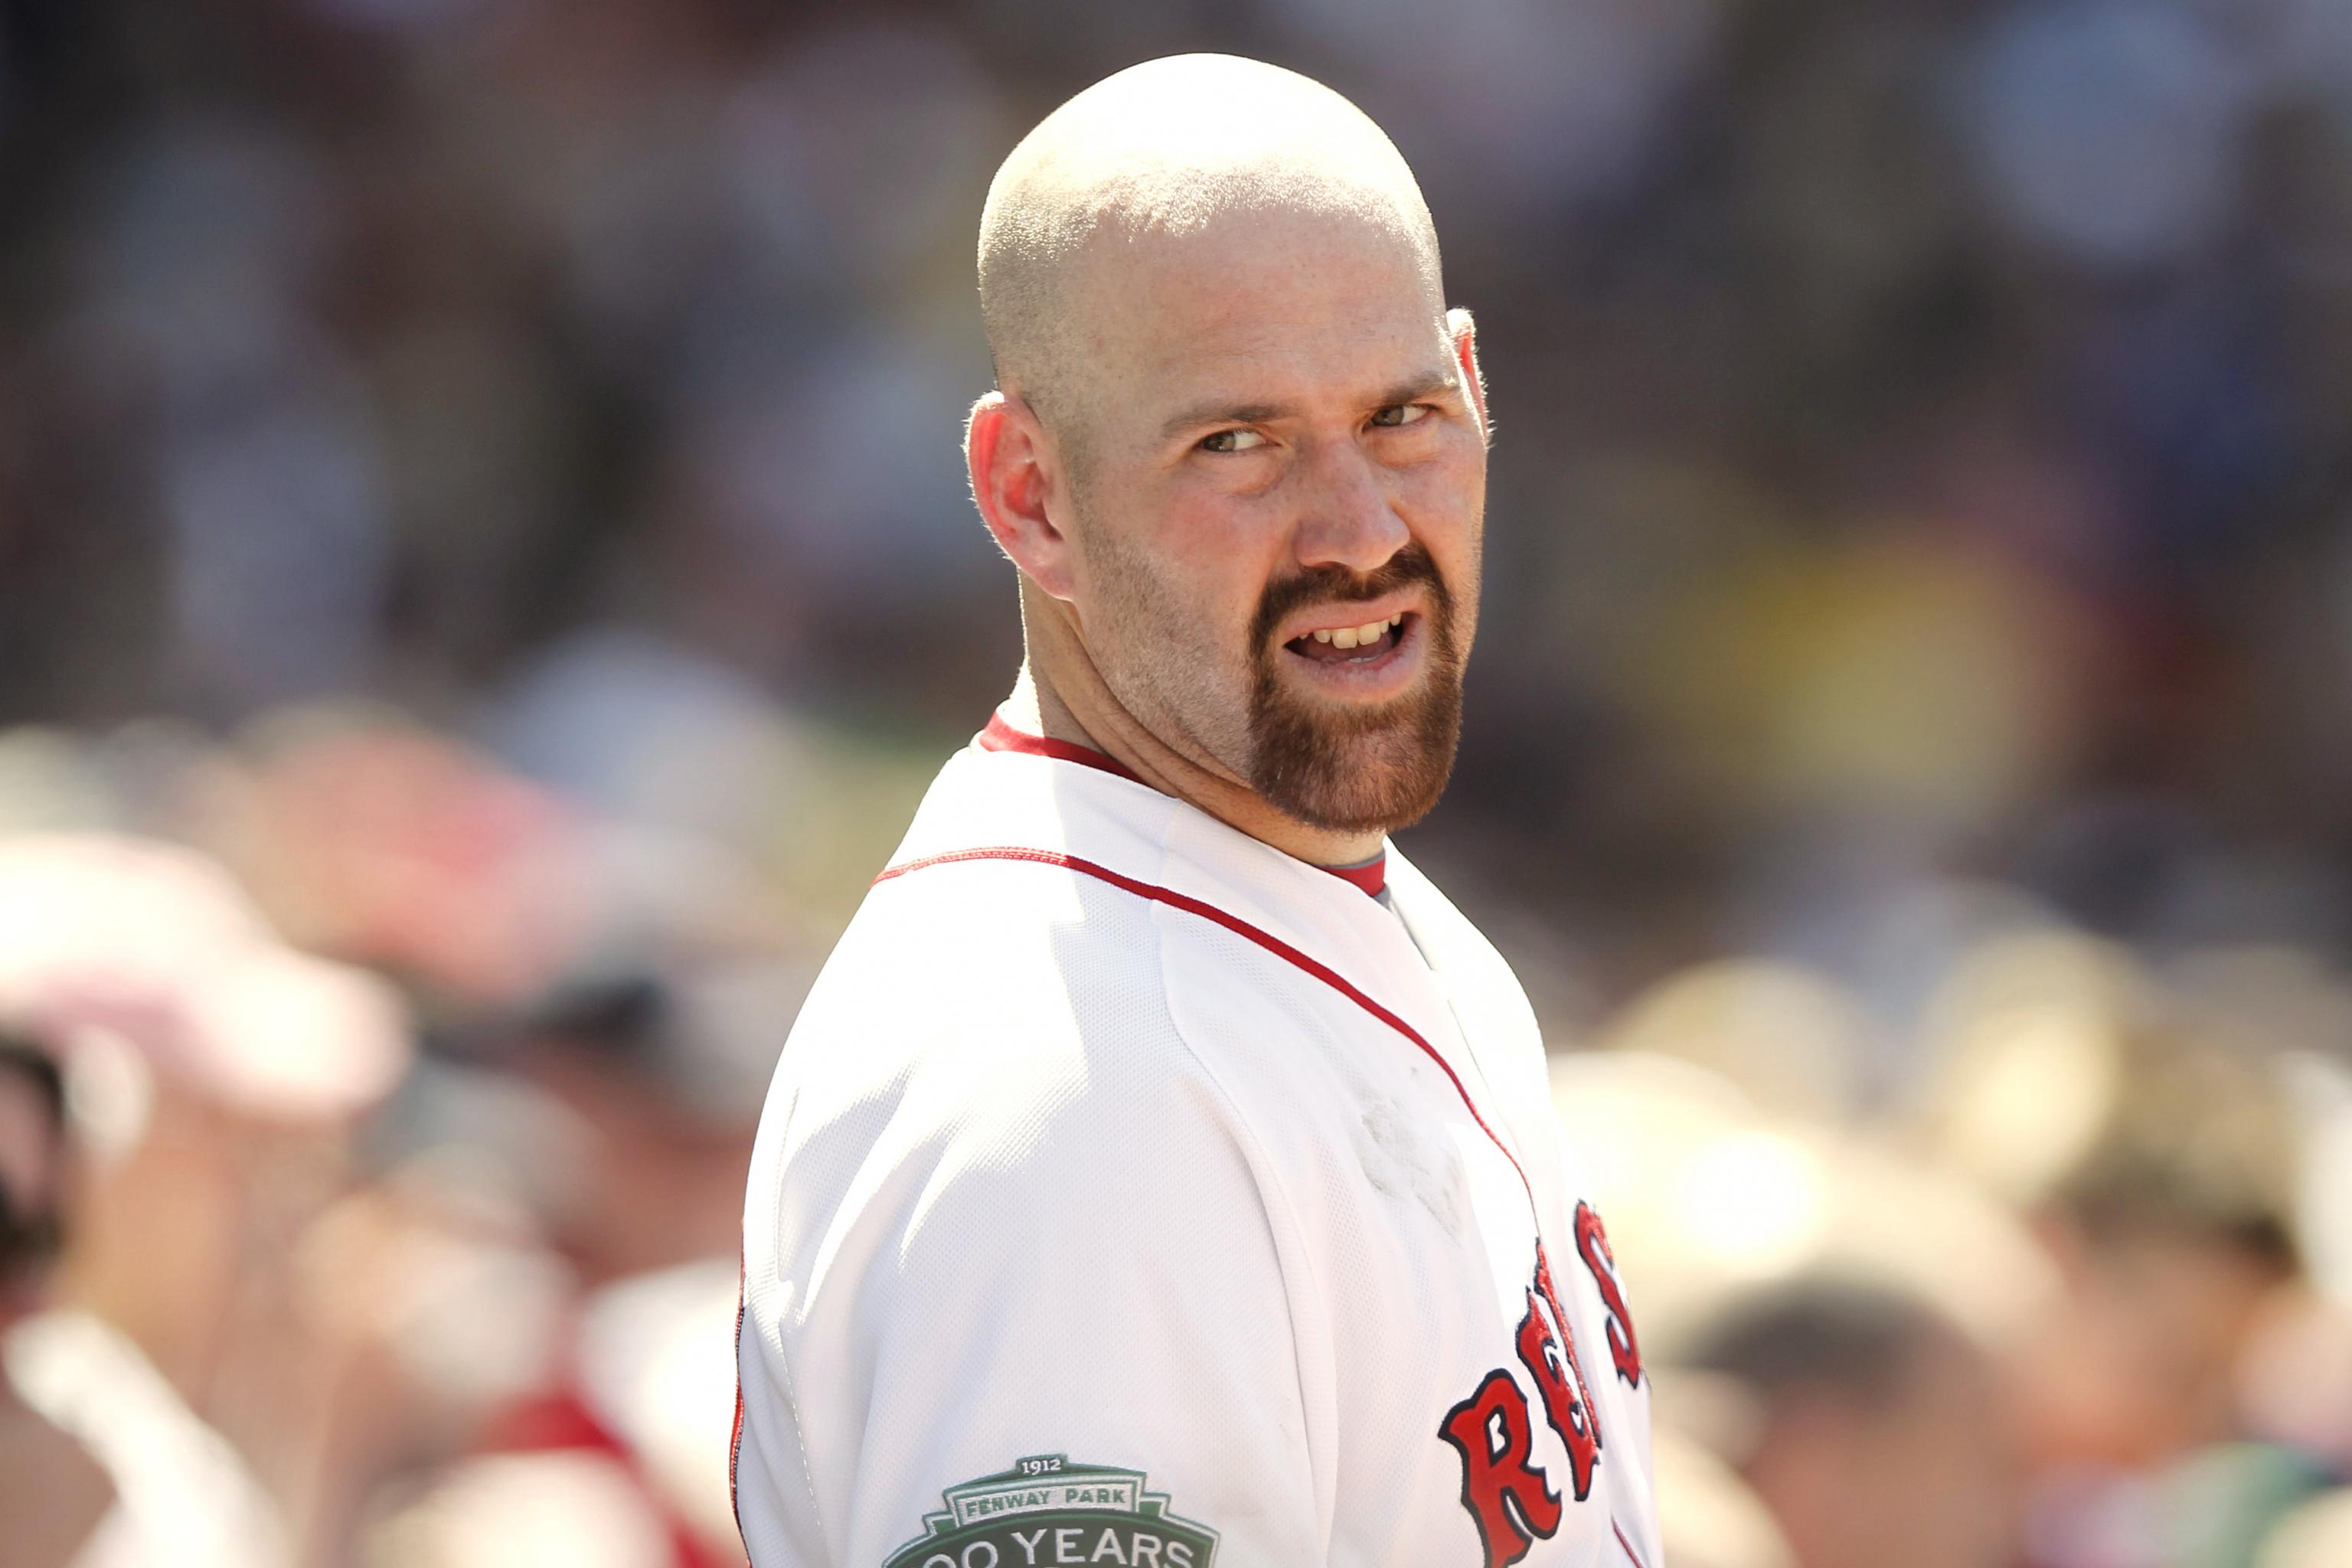 Red Sox player Kevin Youkilis and wife visit with homeless